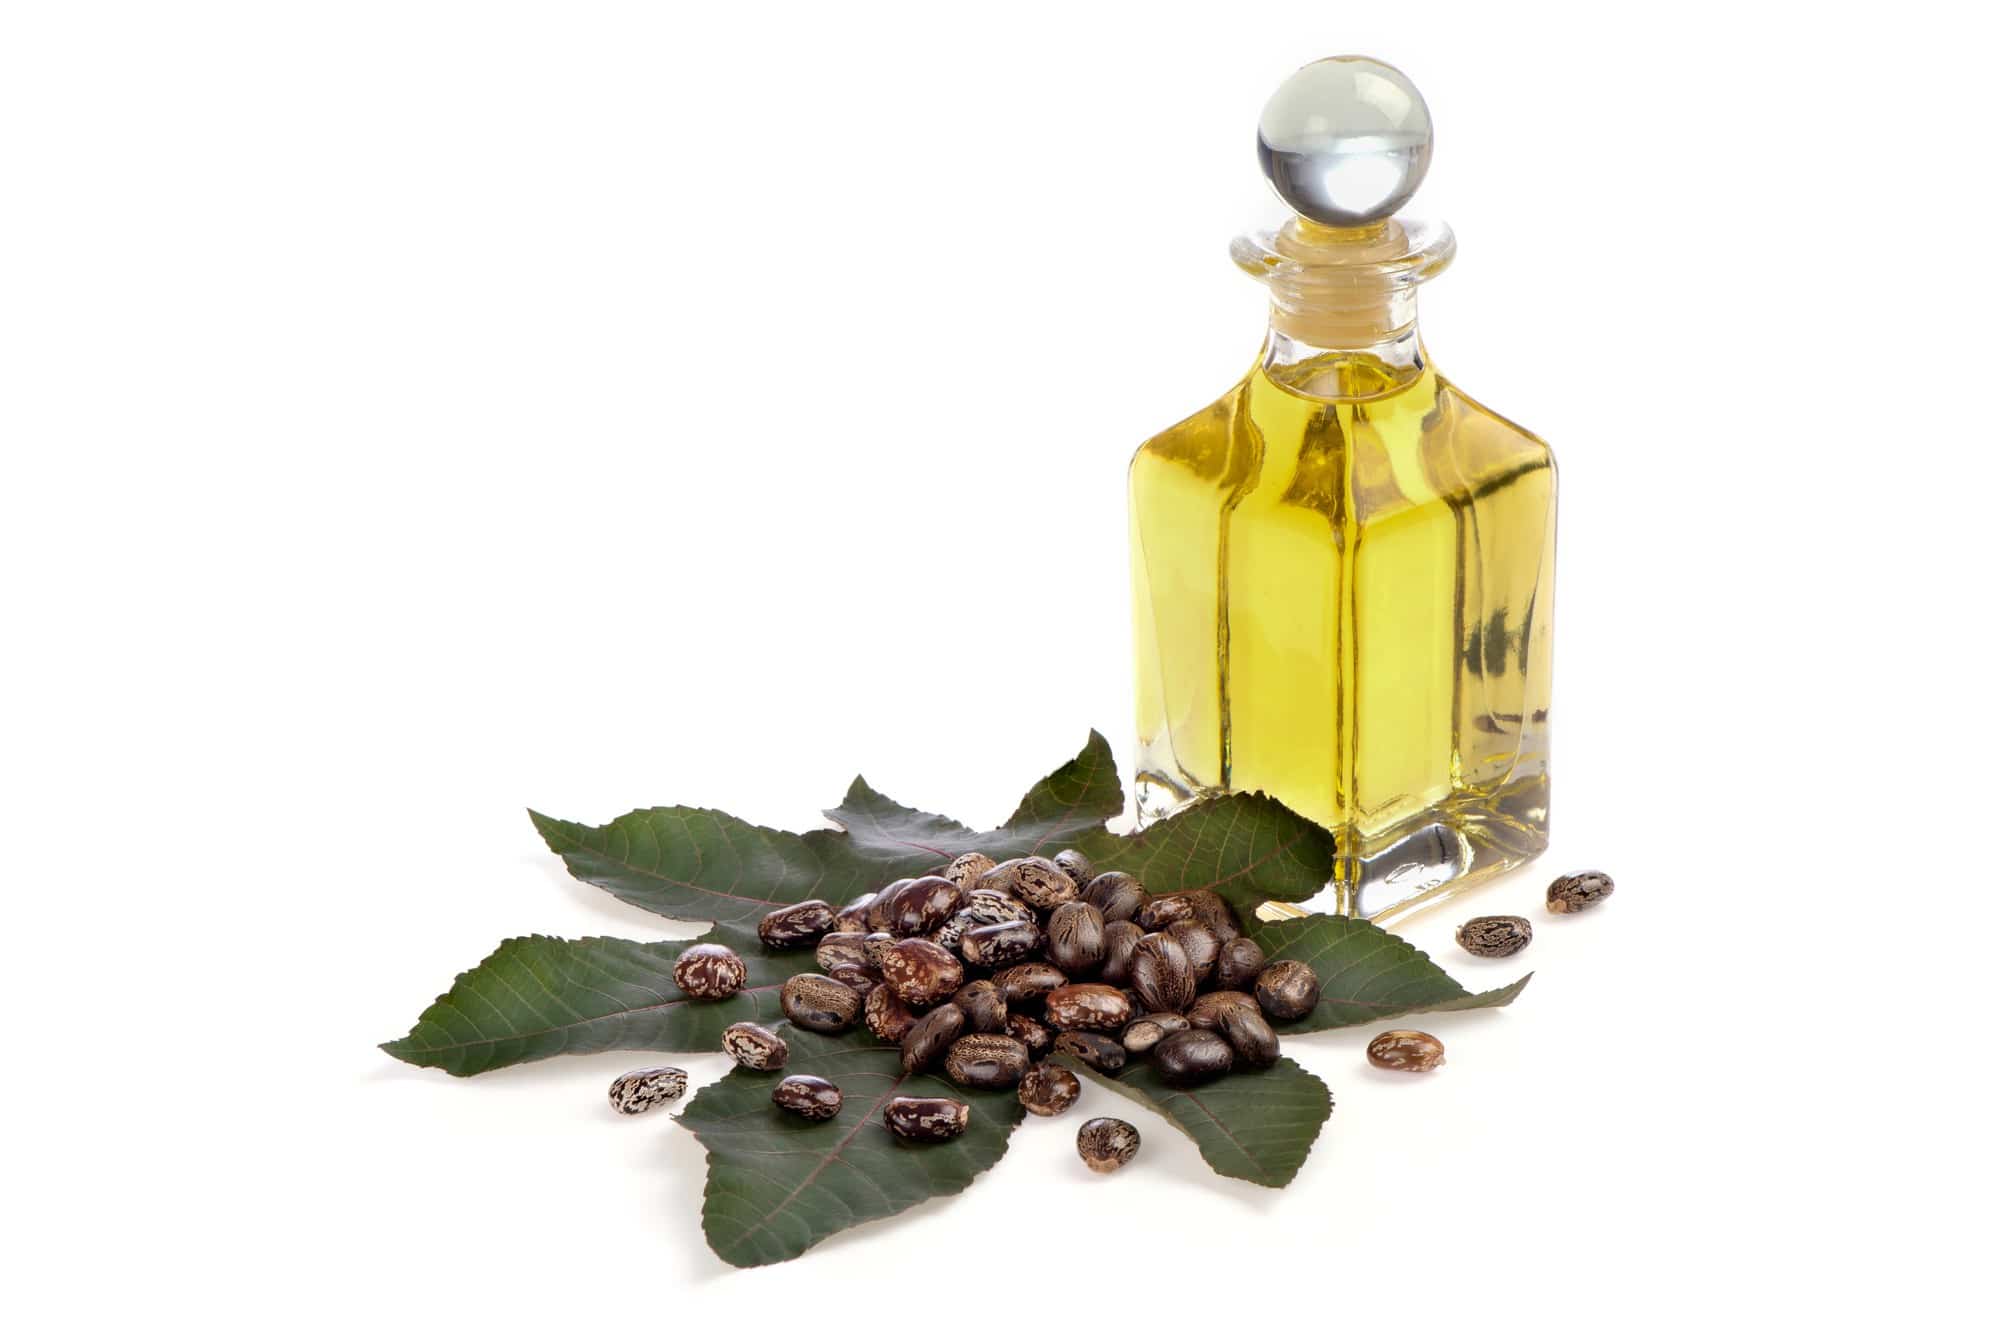 Castor oil and its health benefits